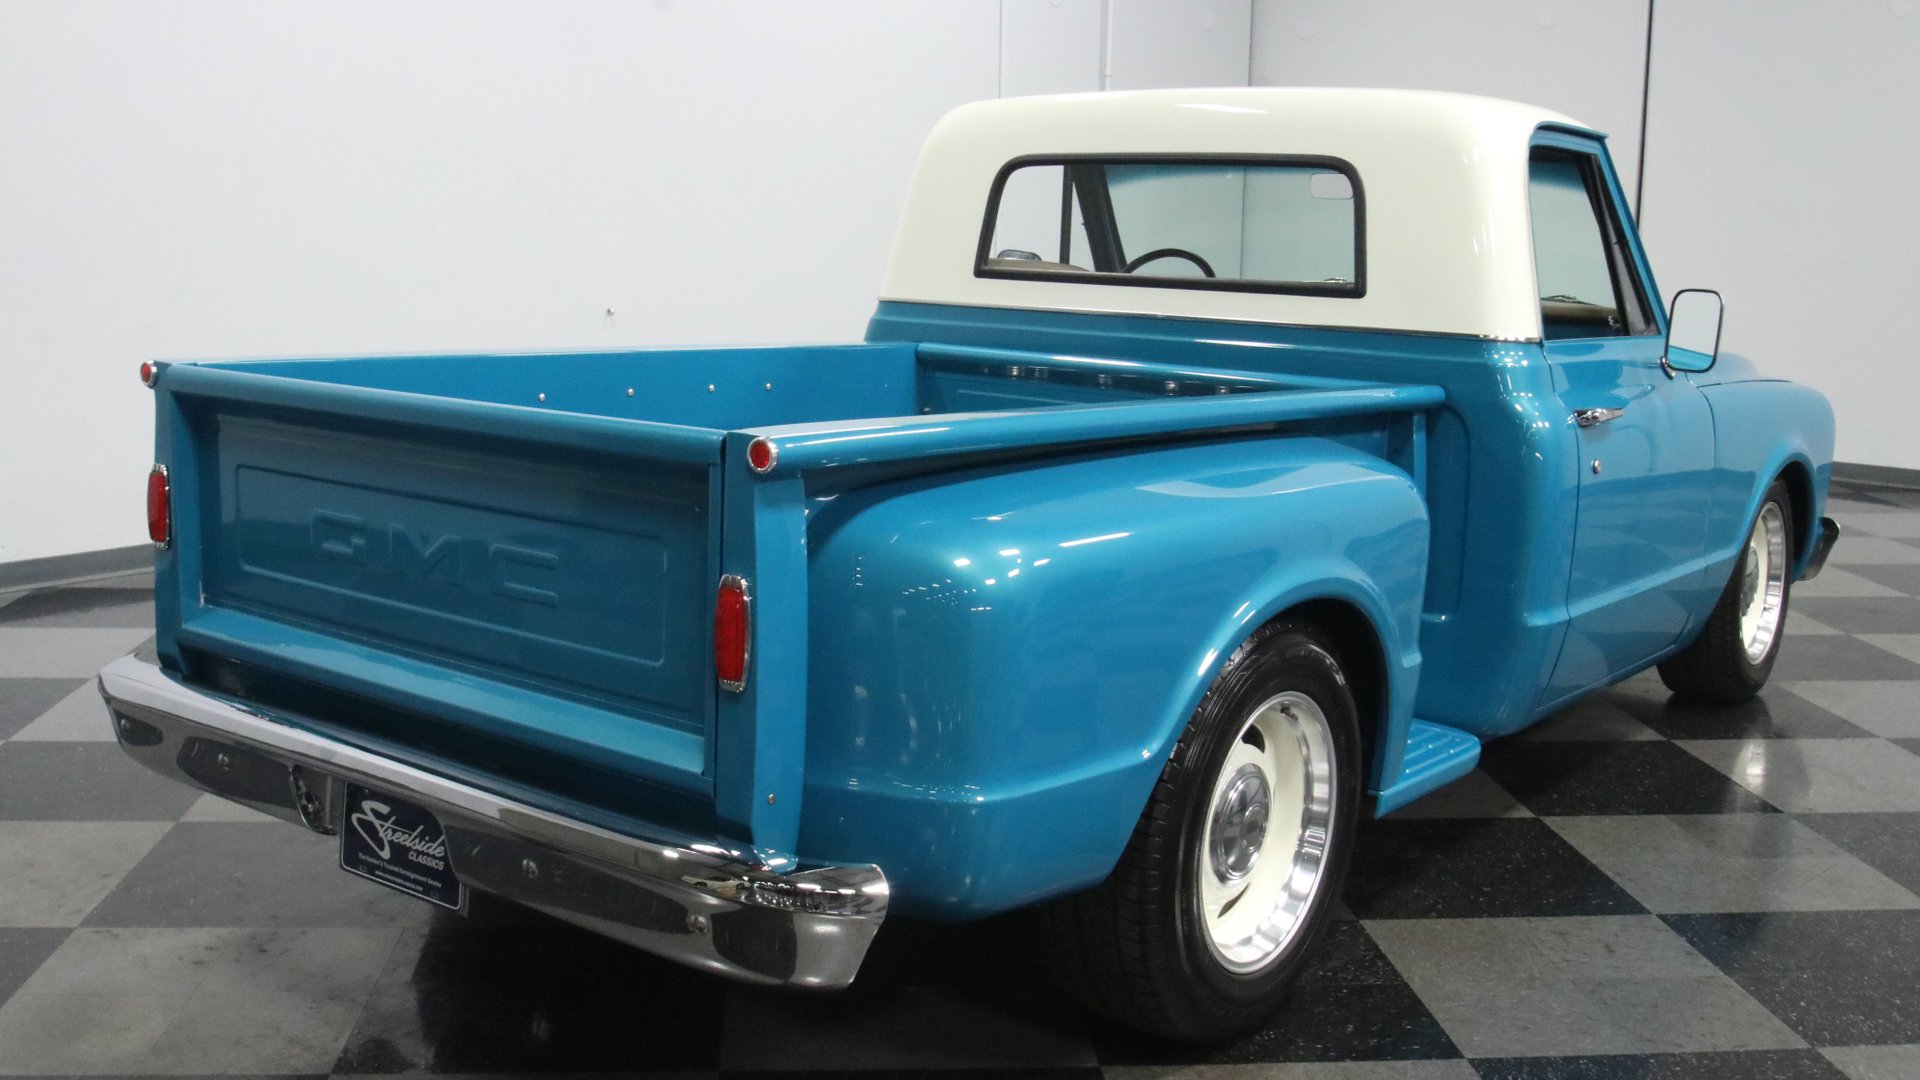 Turquoise 1967 GMC C10 Stepside Pickup Truck Is This Week's Restomod ...